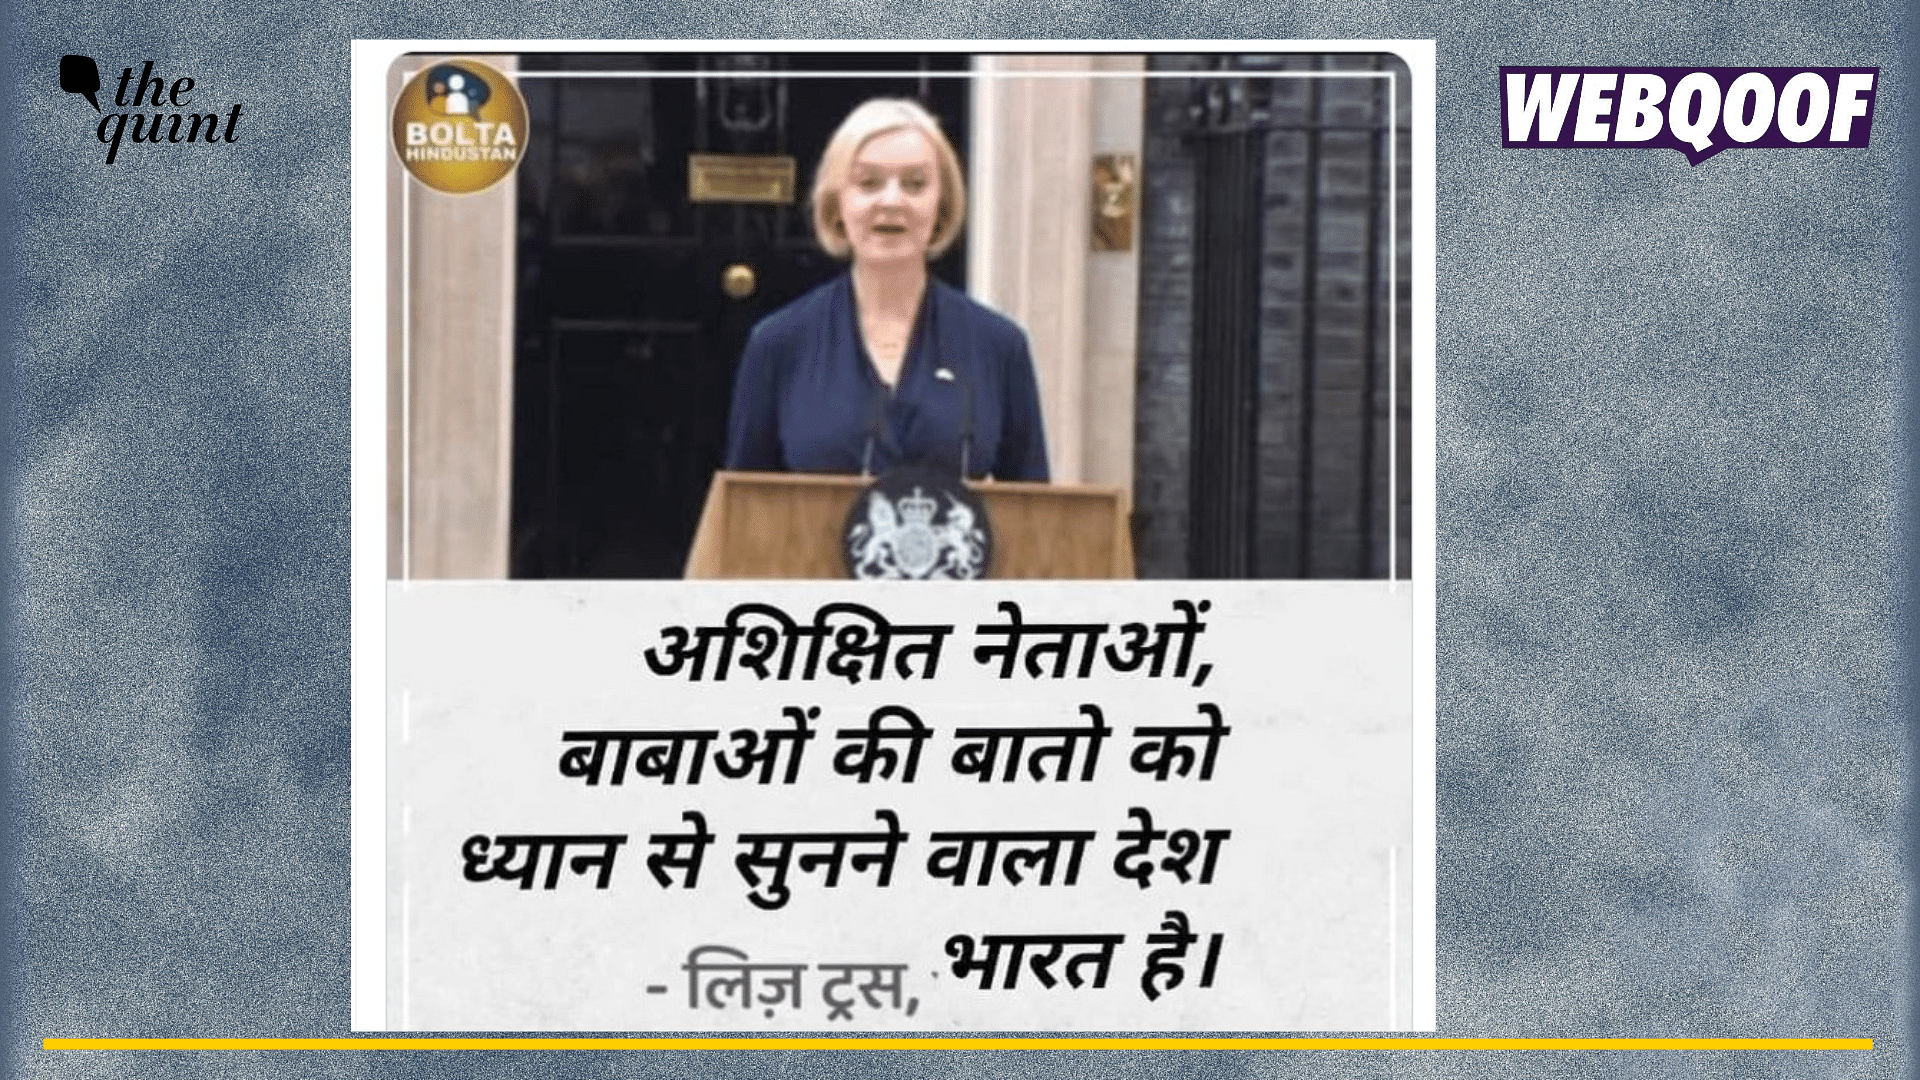 <div class="paragraphs"><p>Fact-check: Liz Truss did not make a statement about Indians following illiterate leaders and spiritual preachers.</p></div>